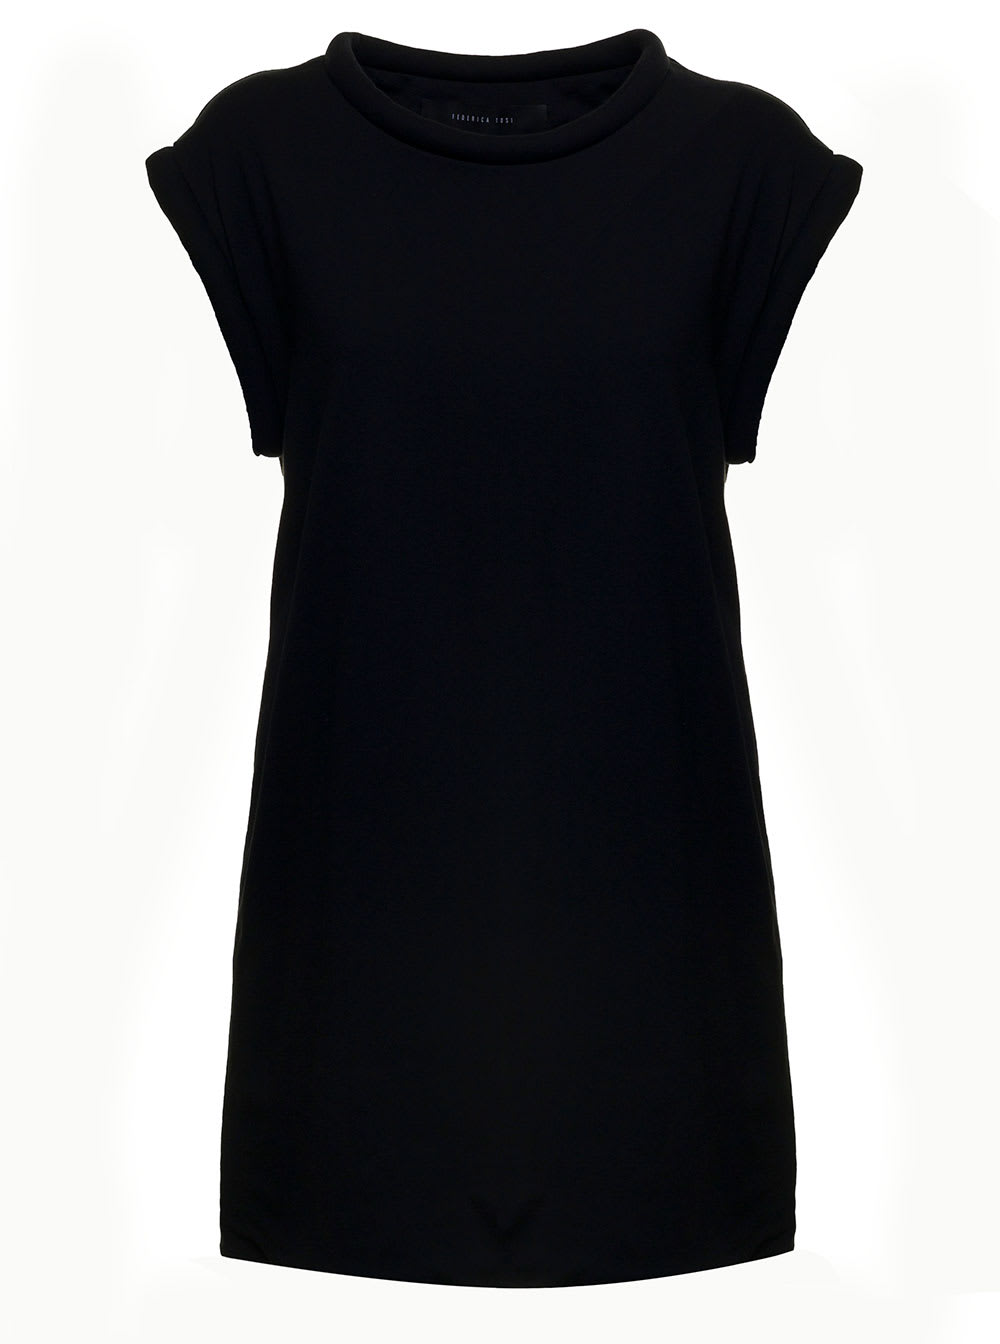 Federica Tosi Black Cotton Dress With Padded Edges